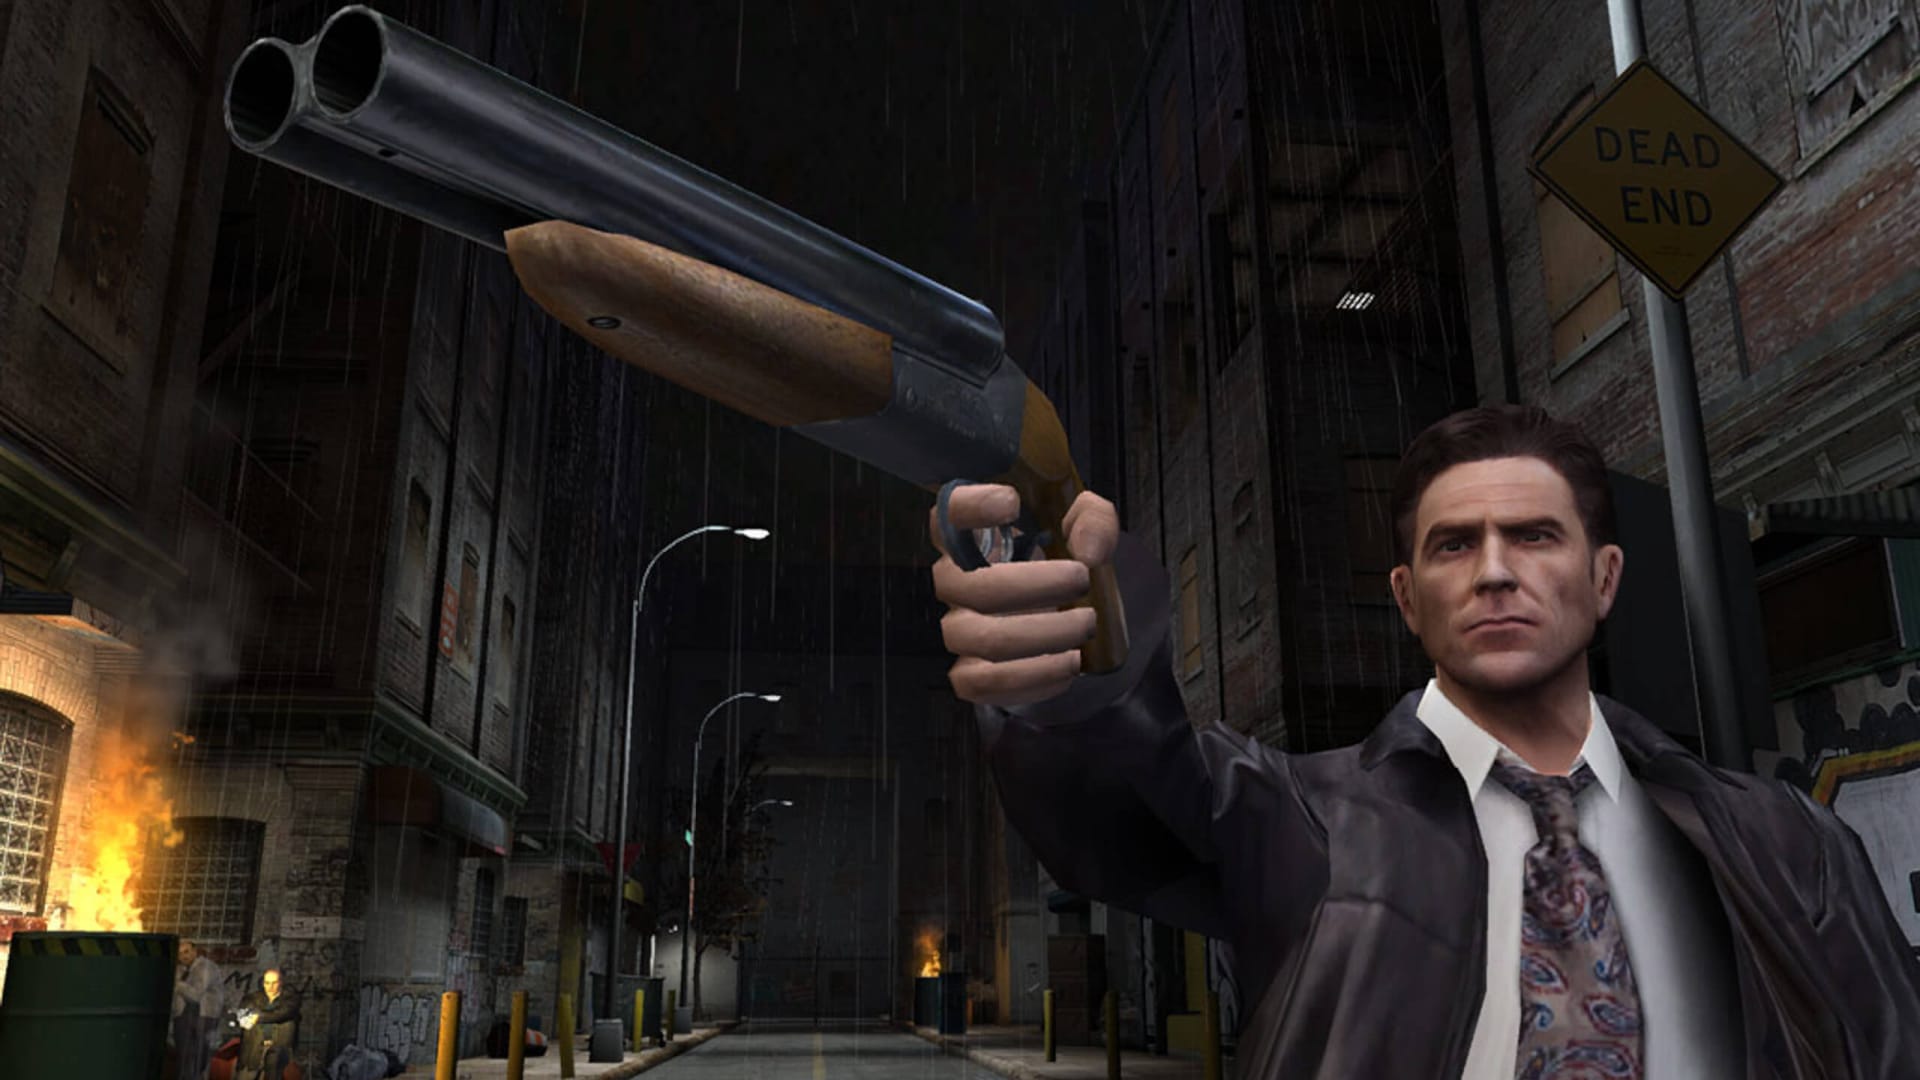 Max Payne and Alan Wake 2 Voice Actor James McCaffrey Has Died Aged 65